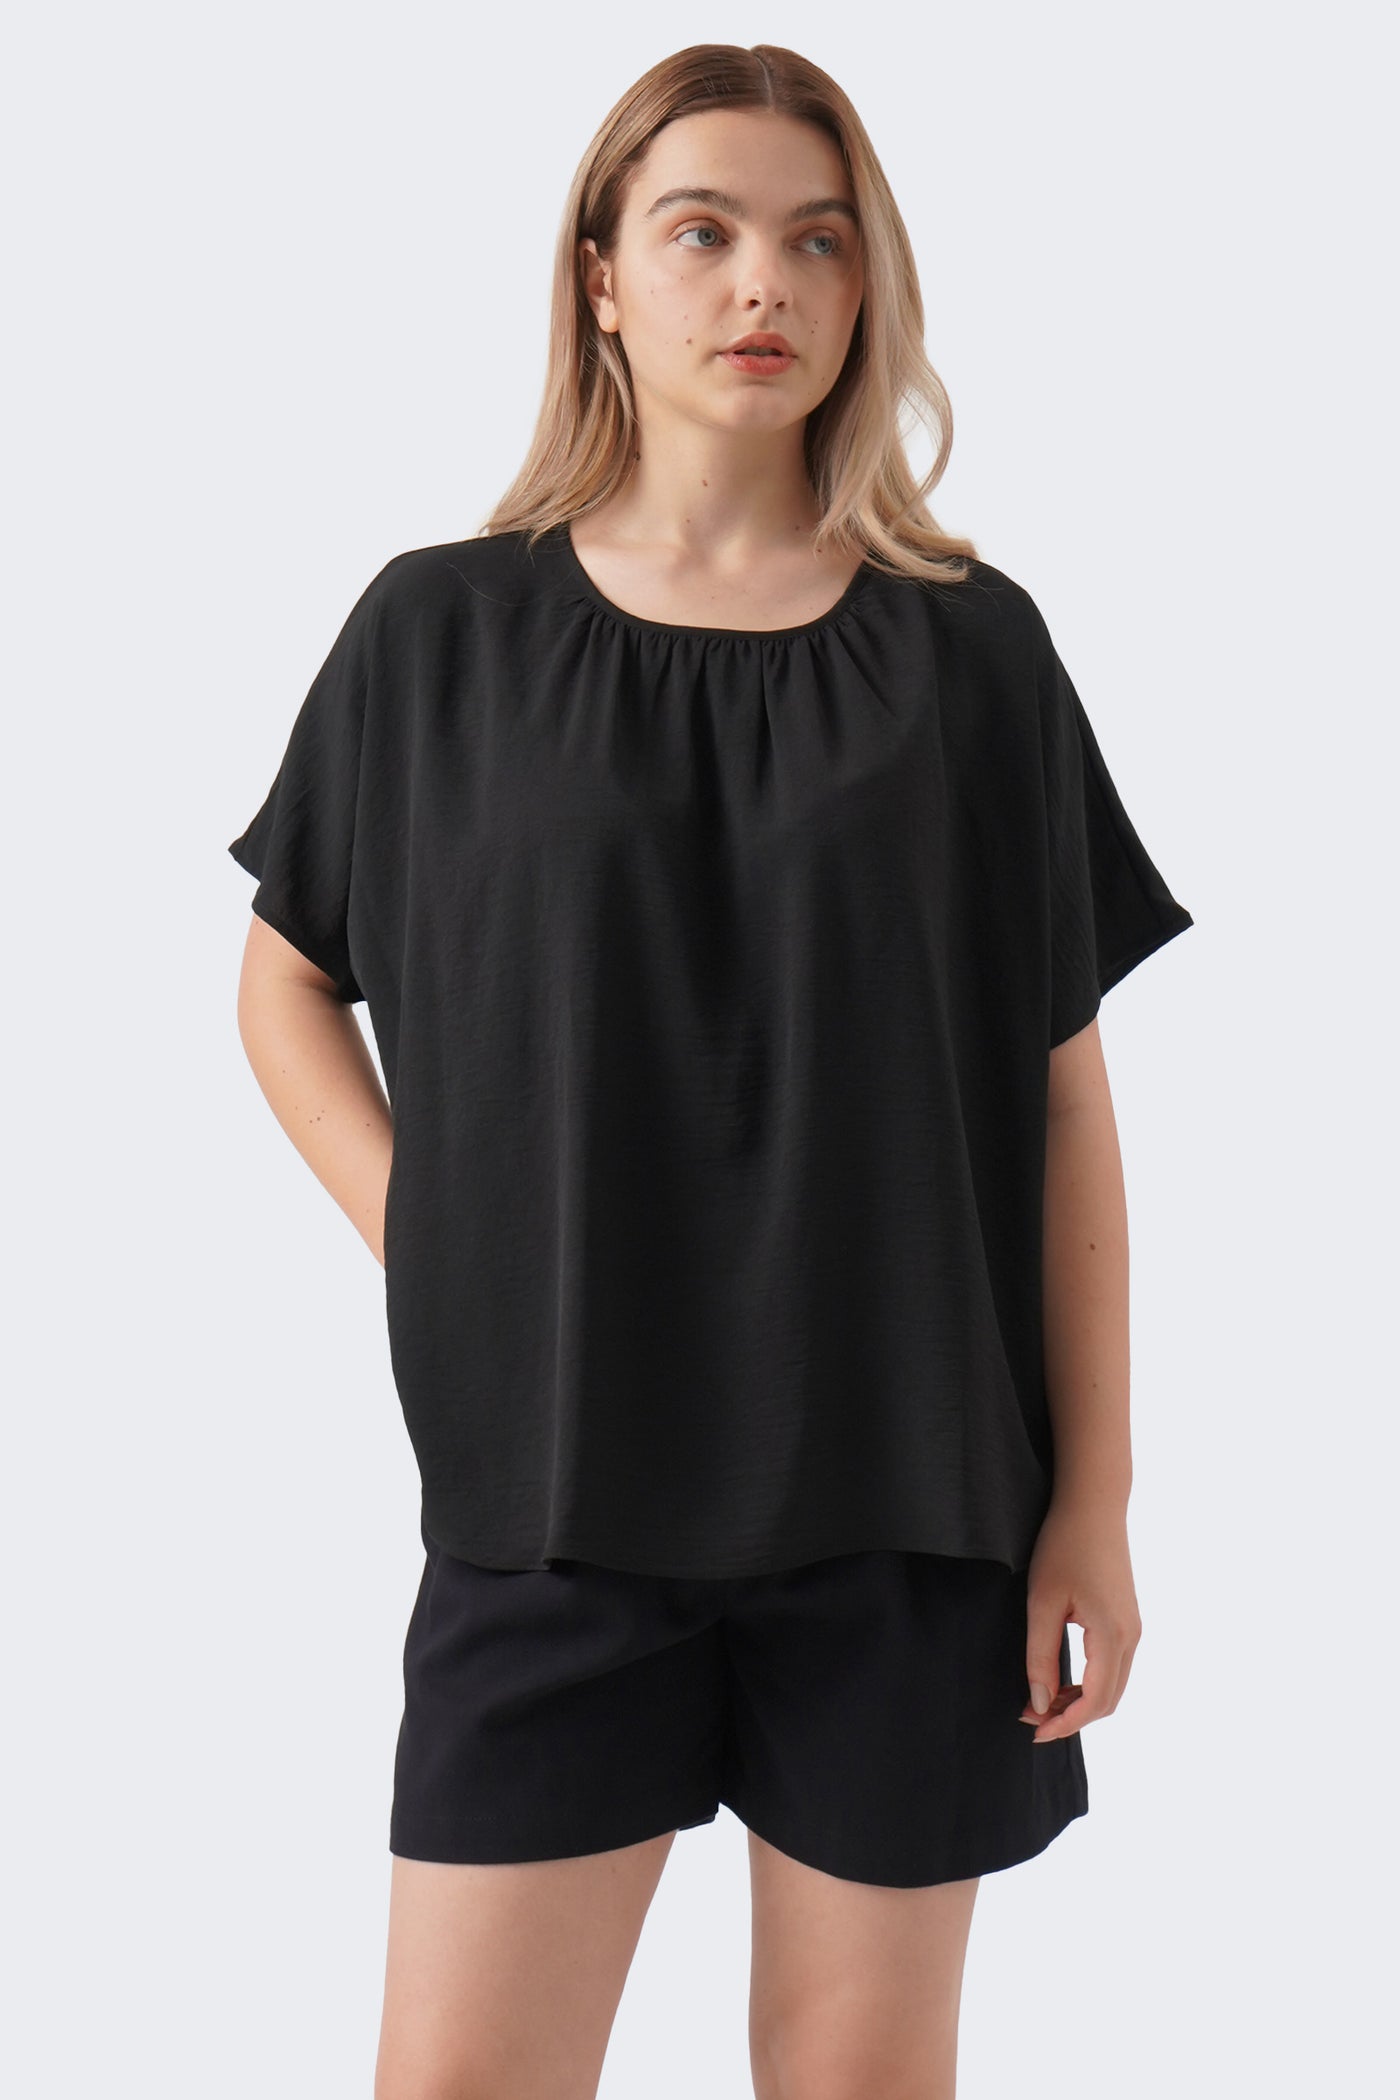 Women's Shirred Neckline Top with Extended Sleeves